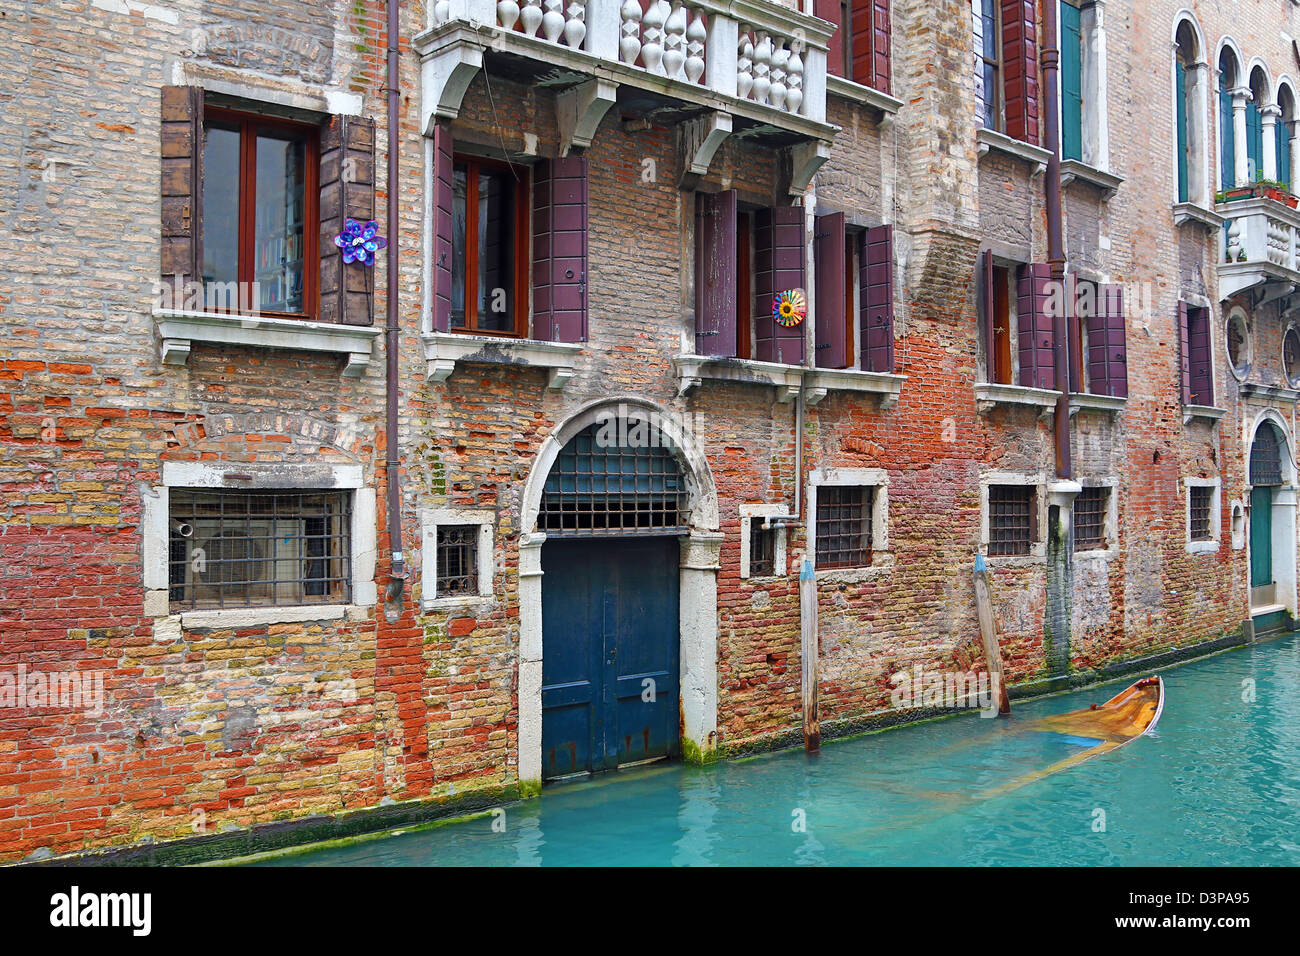 Doorway of a building on a canal in Venice, Italy Stock Photo